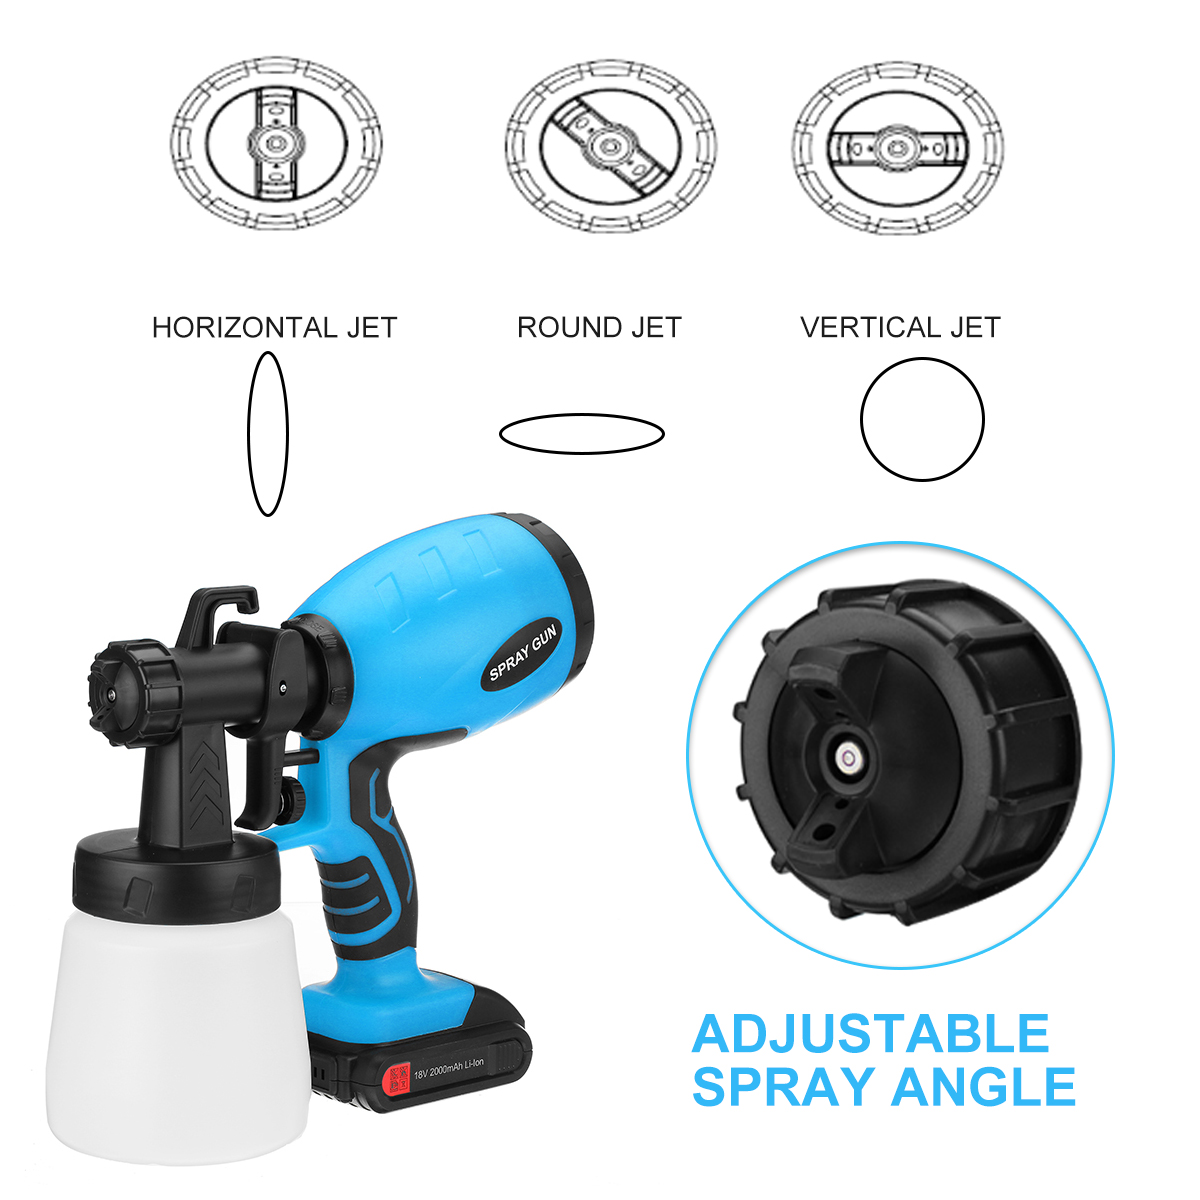 2000mAh-Portable-Electric-Paint-Sprayer-Wireless-Handheld-Spray-Guns-Home-Indoor-Fence-Painting-Tool-1851241-5